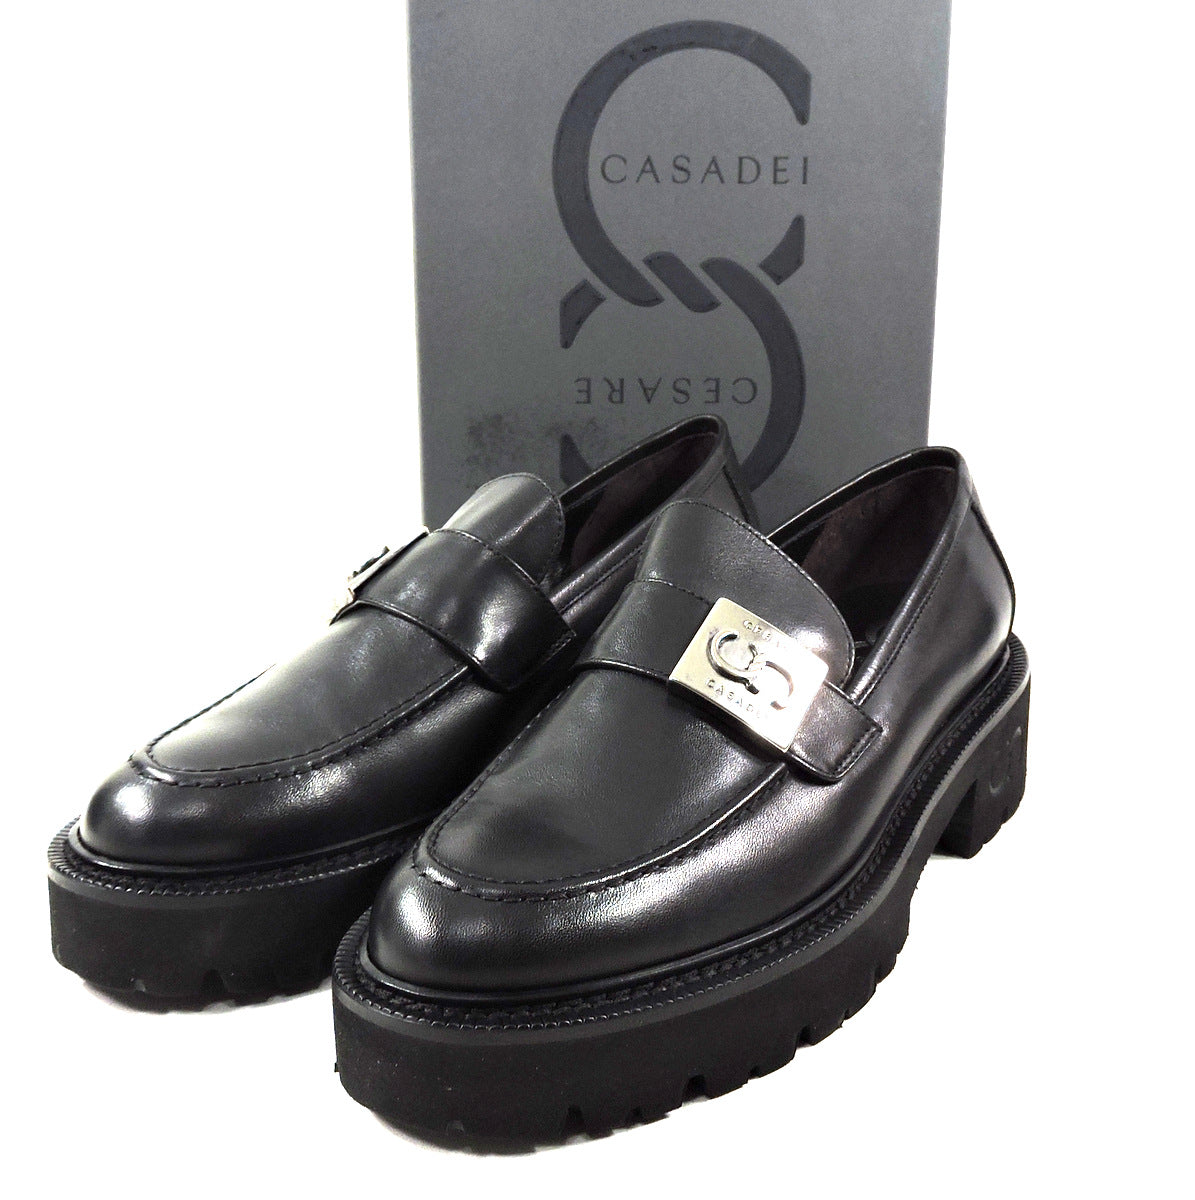 CASADEI 🇮🇹 WOMEN'S BLACK SOFT LEATHER COMFORT LOAFERS